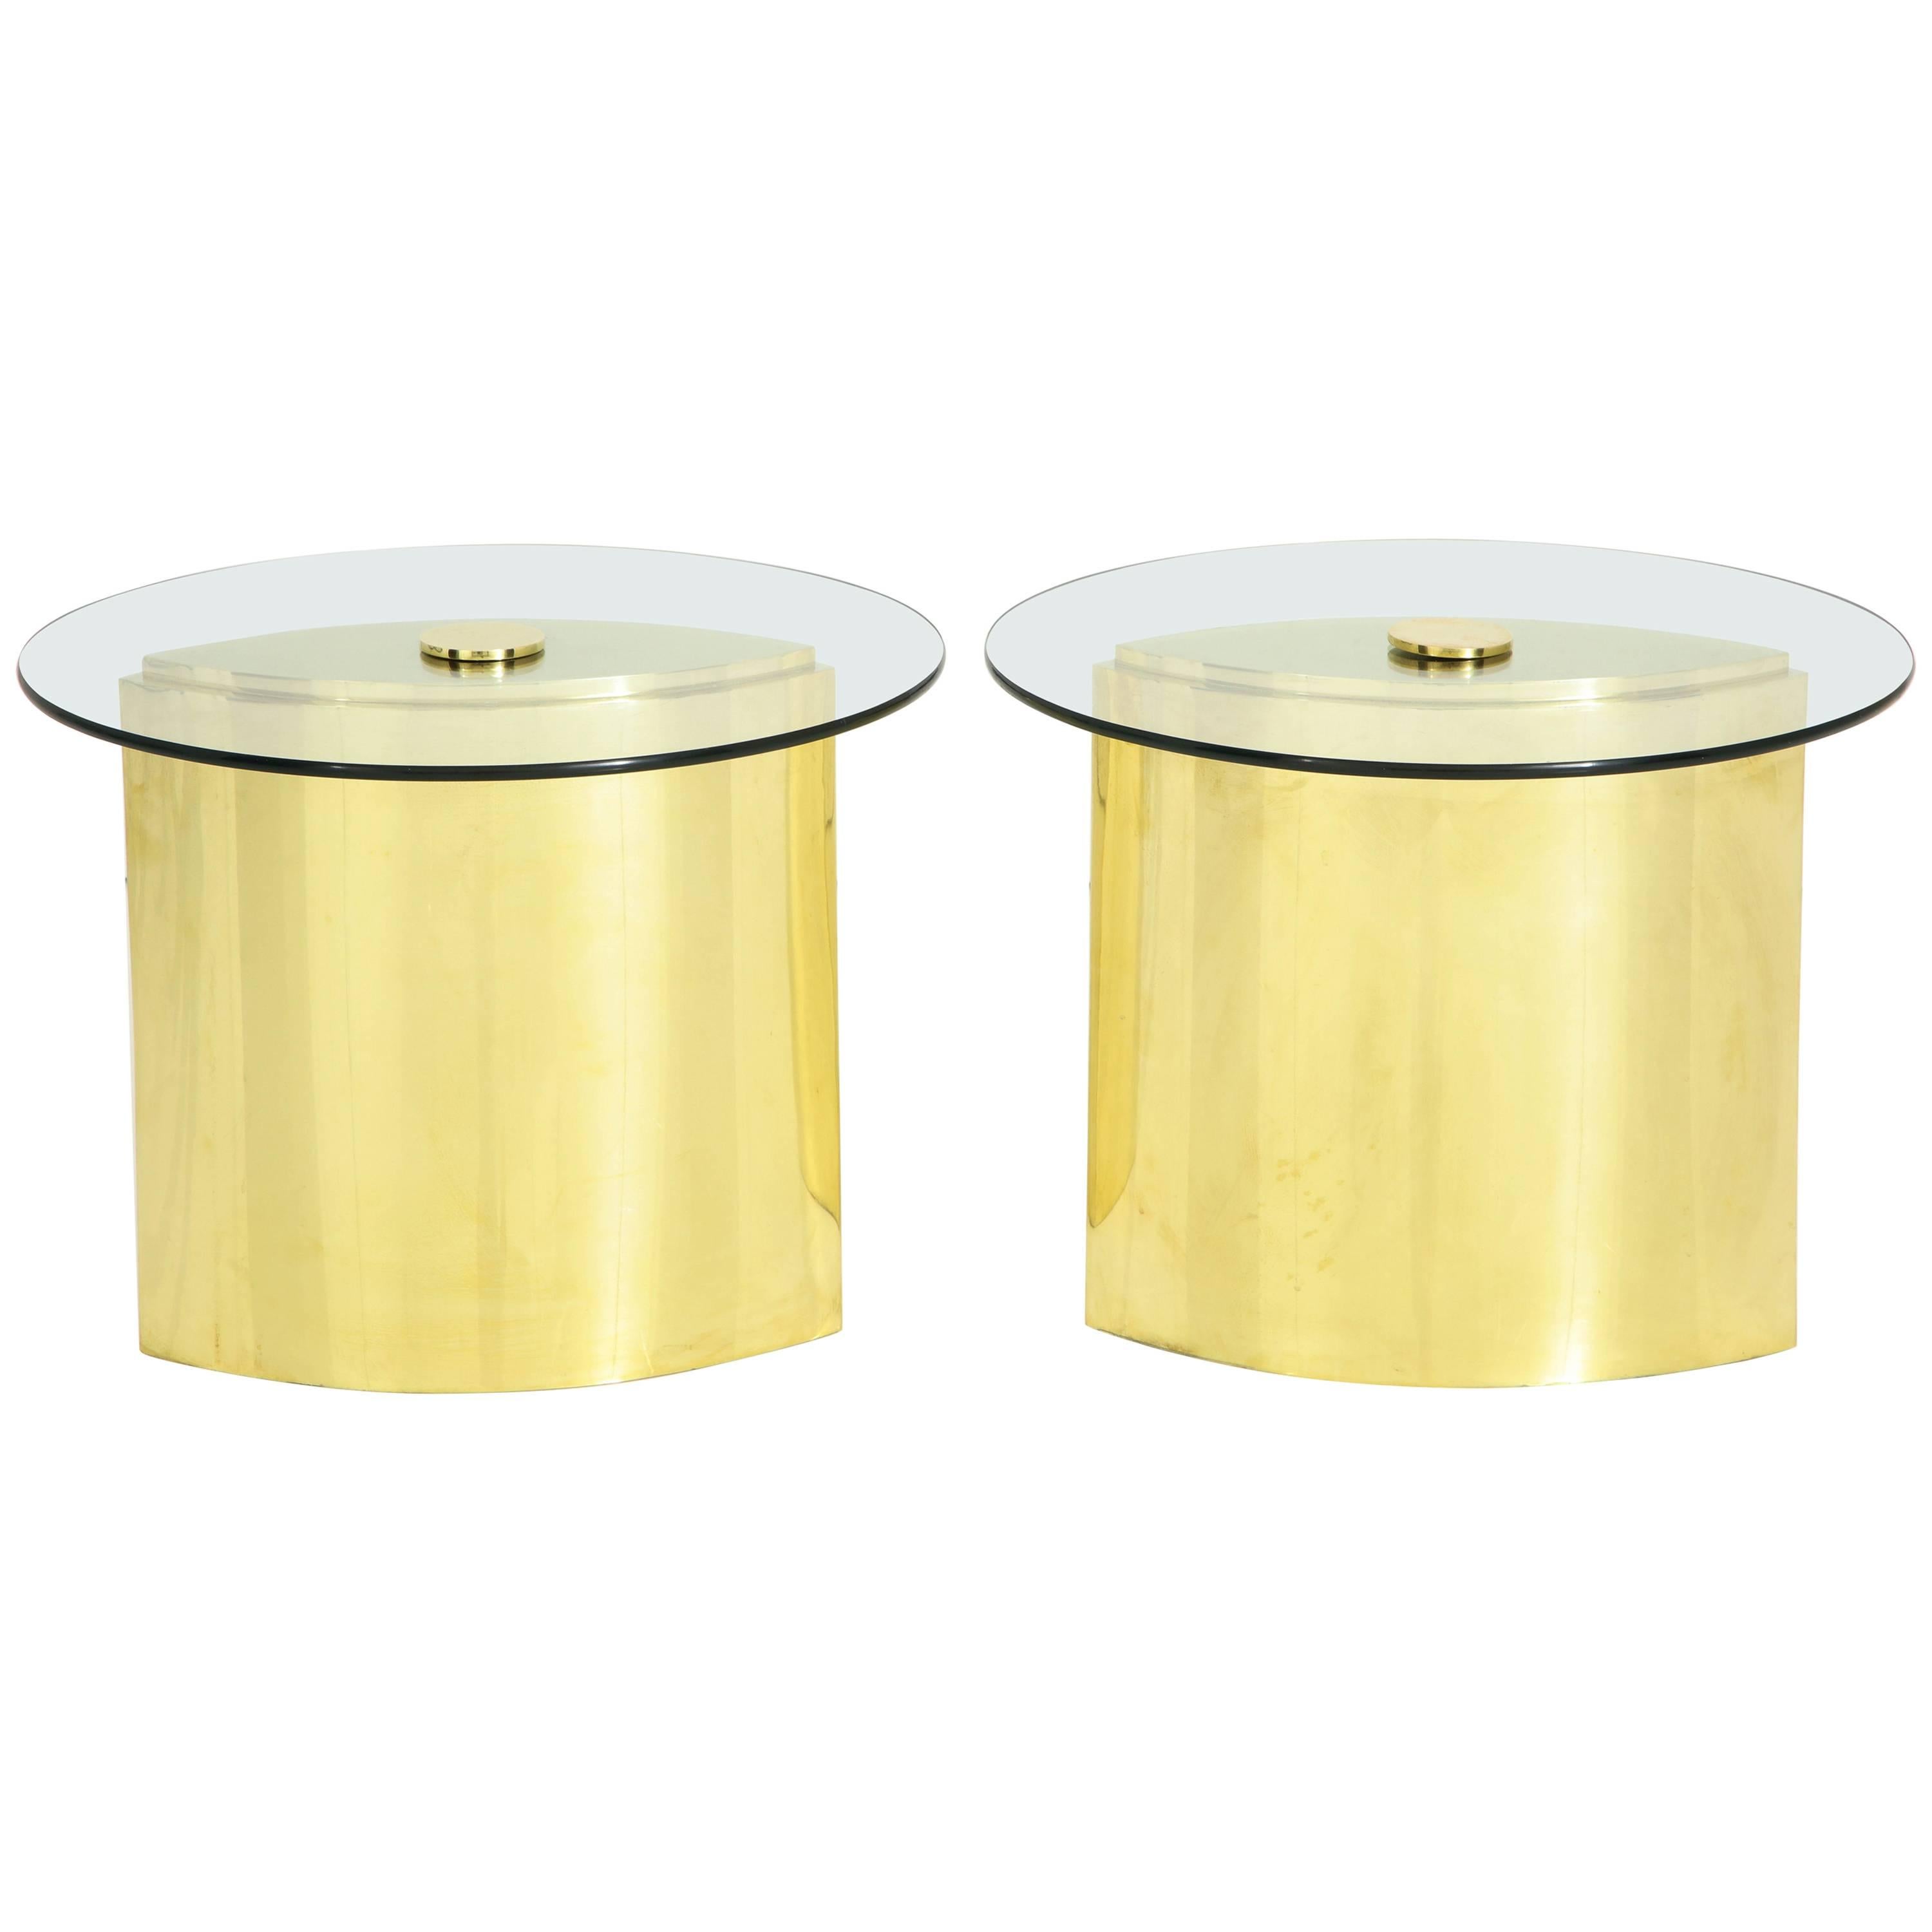 Pair of "Eye" Brass Side Tables by Steve Chase